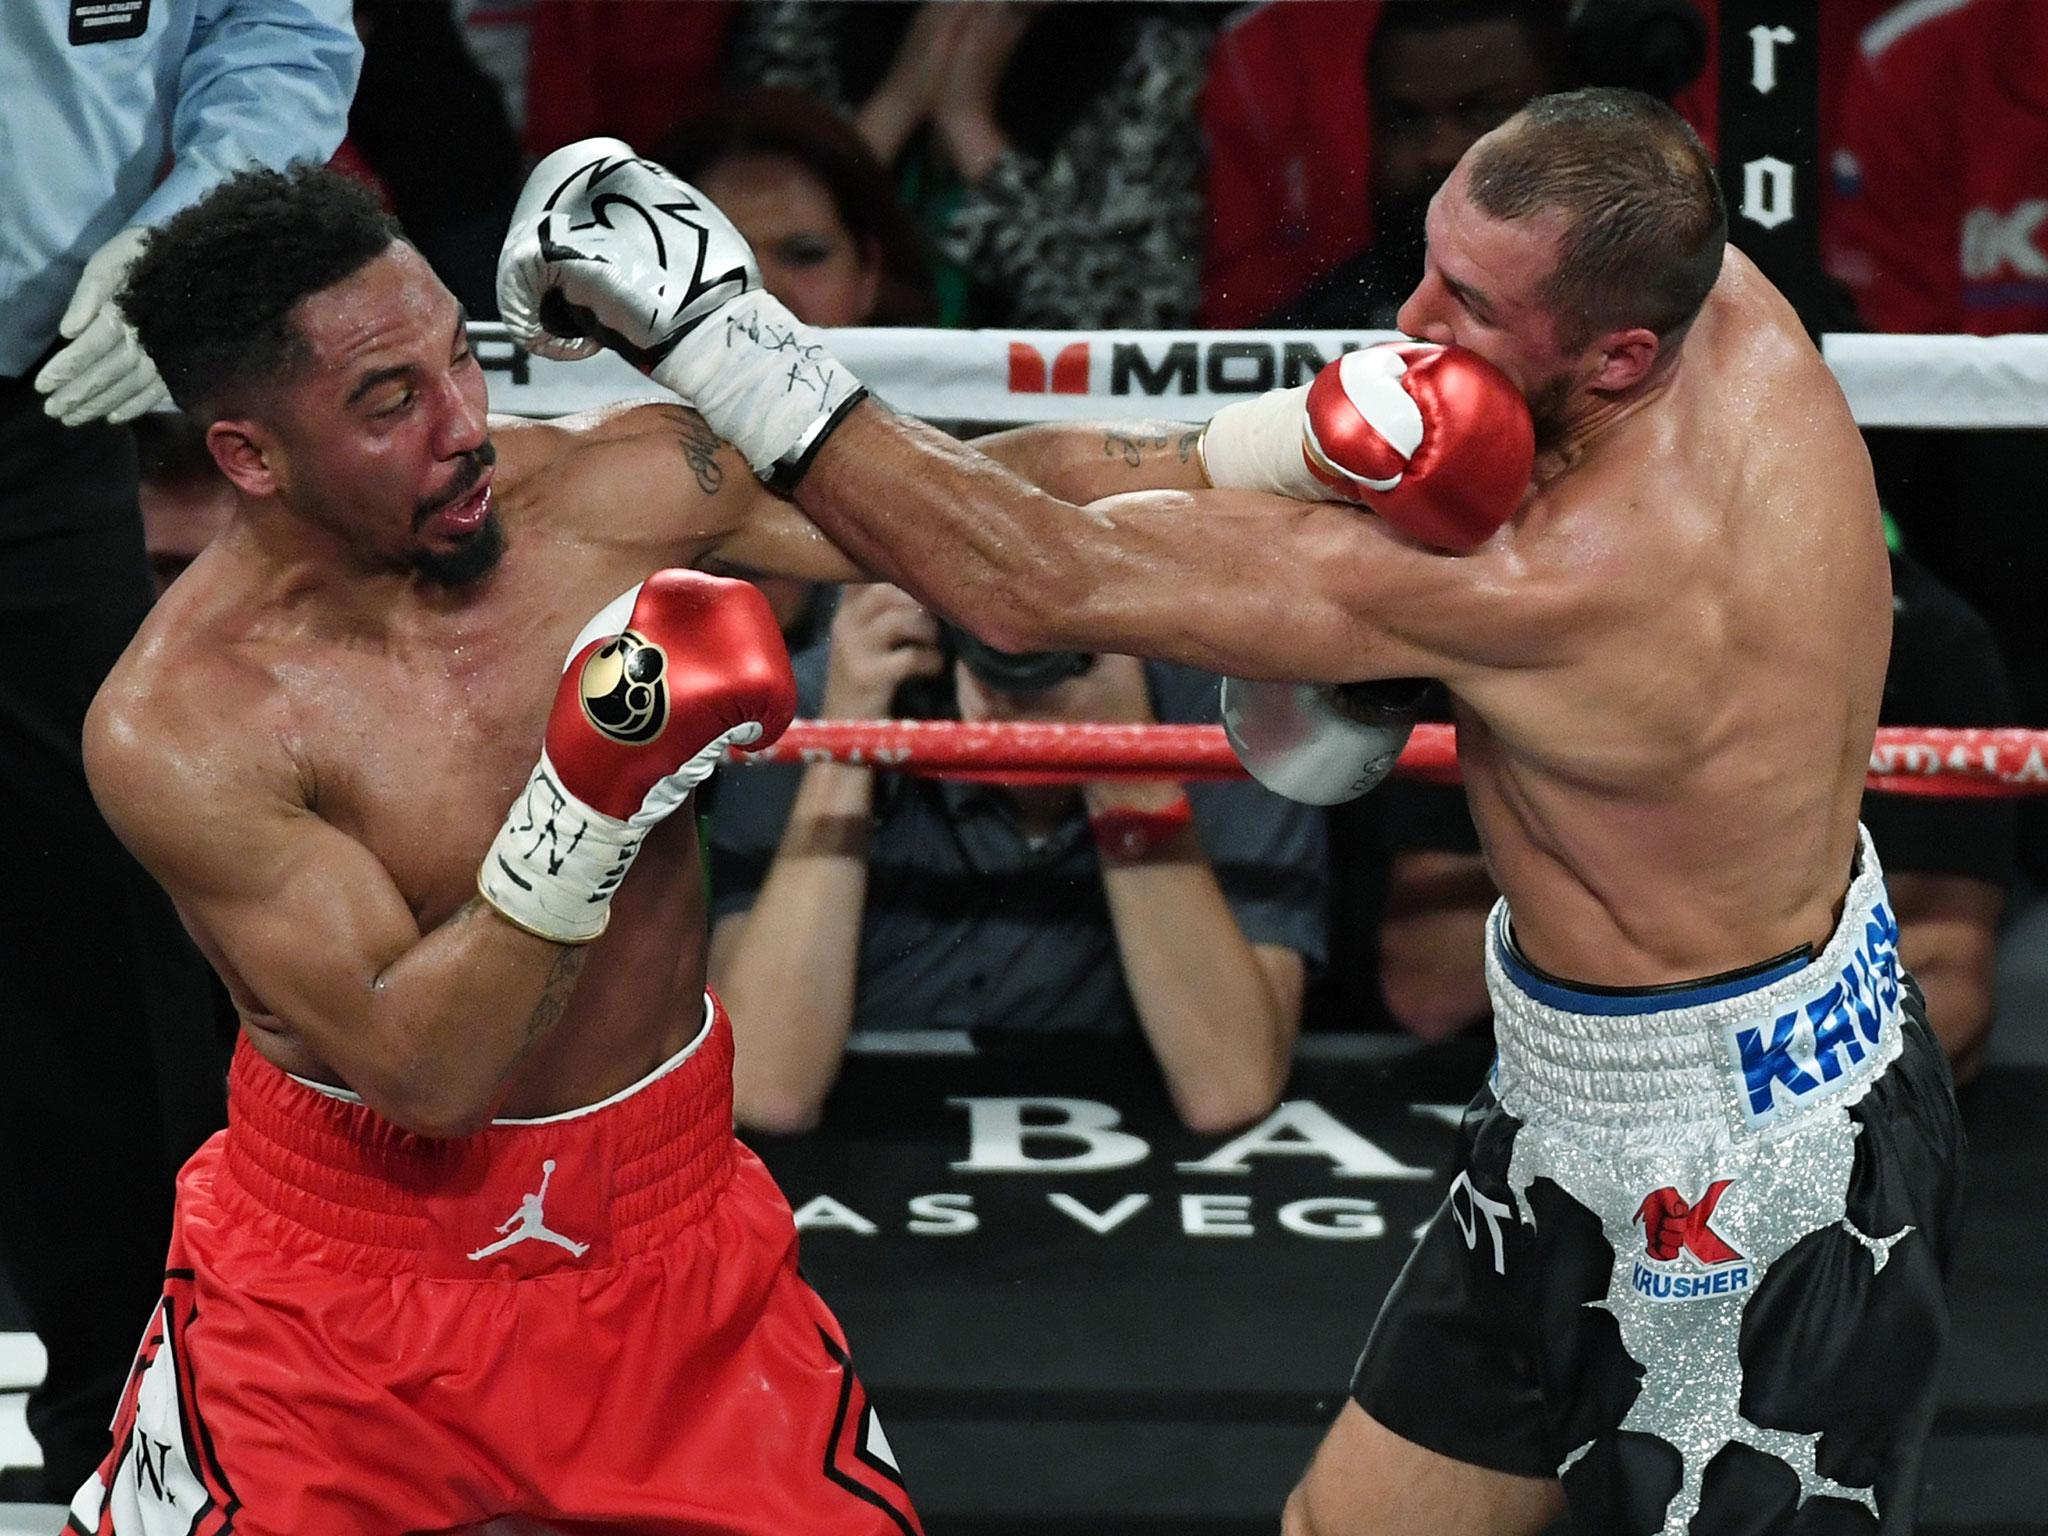 Ward came through a second war with Kovalev this weekend